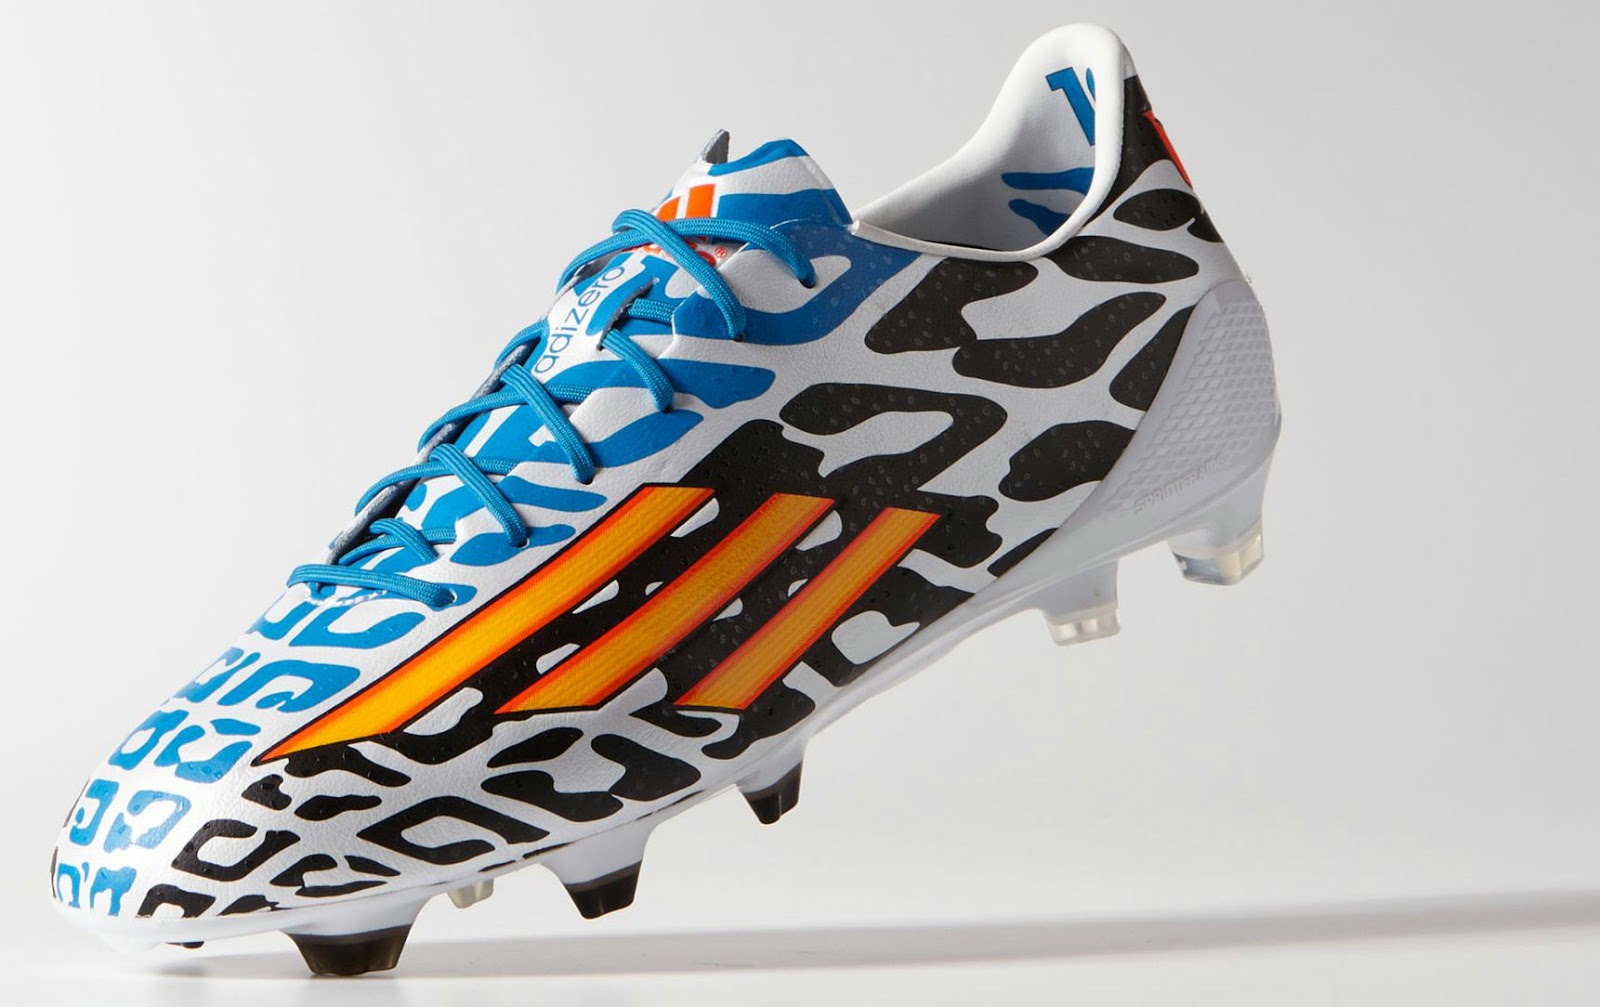 Adizero Messi 2014 World Cup Battle Pack Boot Released - Footy Headlines